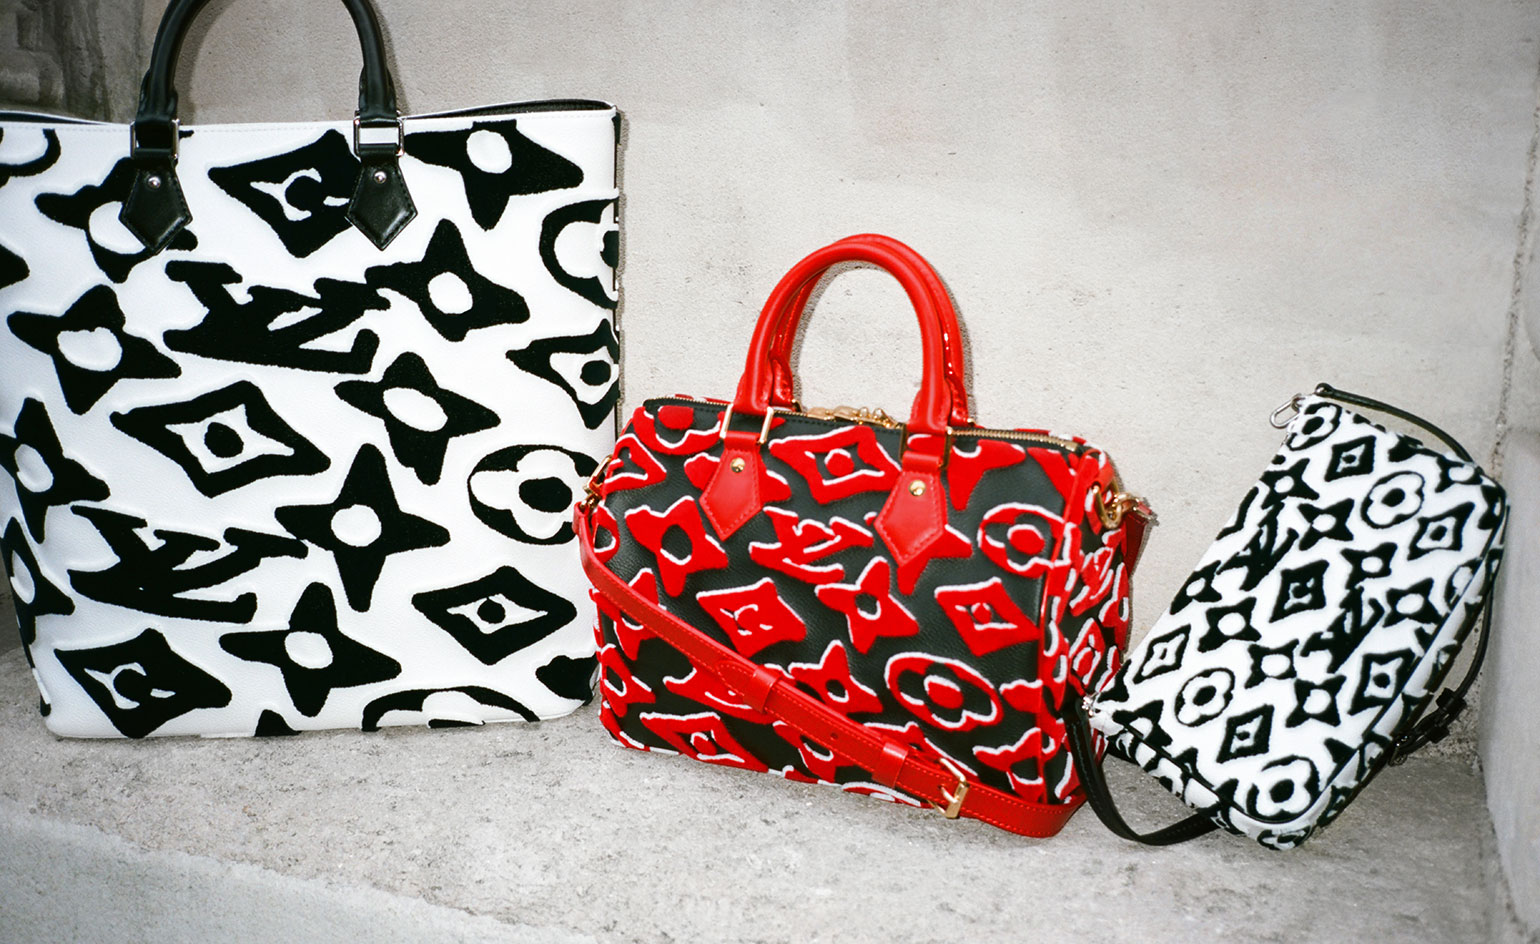 These artist-designed handbags are instant collectors items | Wallpaper